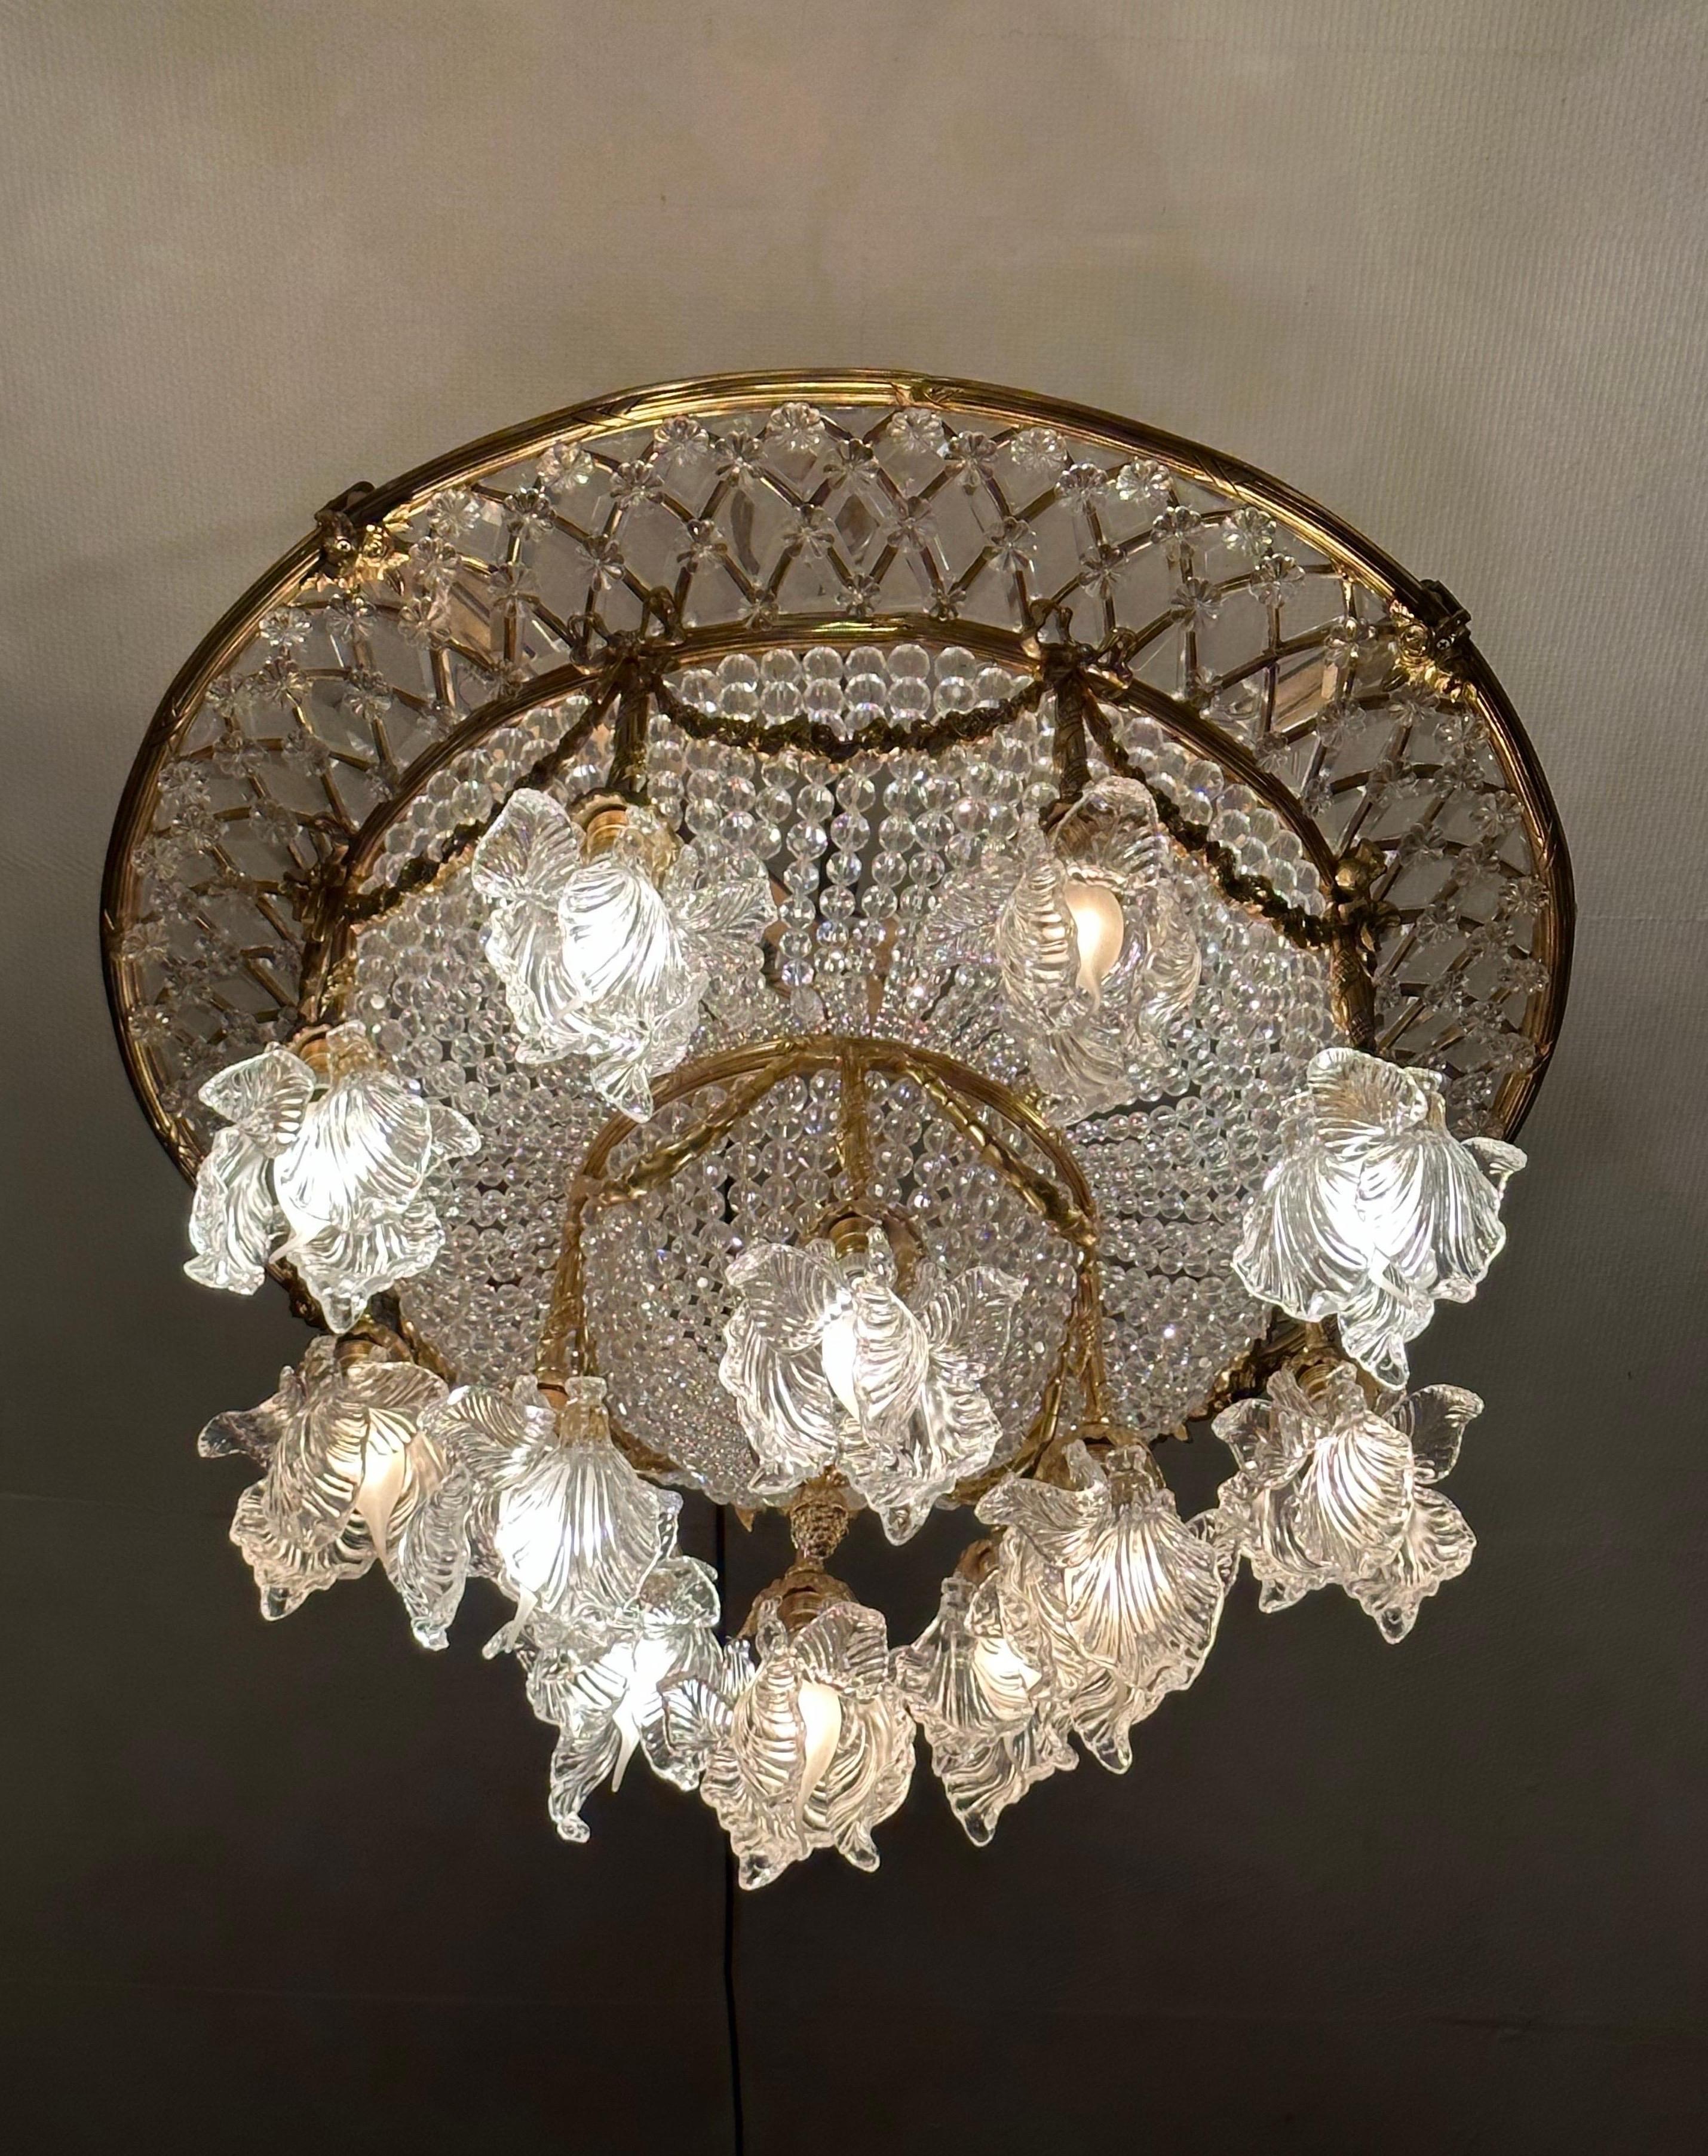 Introducing a stunning French Crystal Art Deco Chandelier that will instantly elevate your space with its timeless beauty and Art Deco allure.

Meticulously crafted in France, this chandelier captures the essence of the Art Deco movement with its